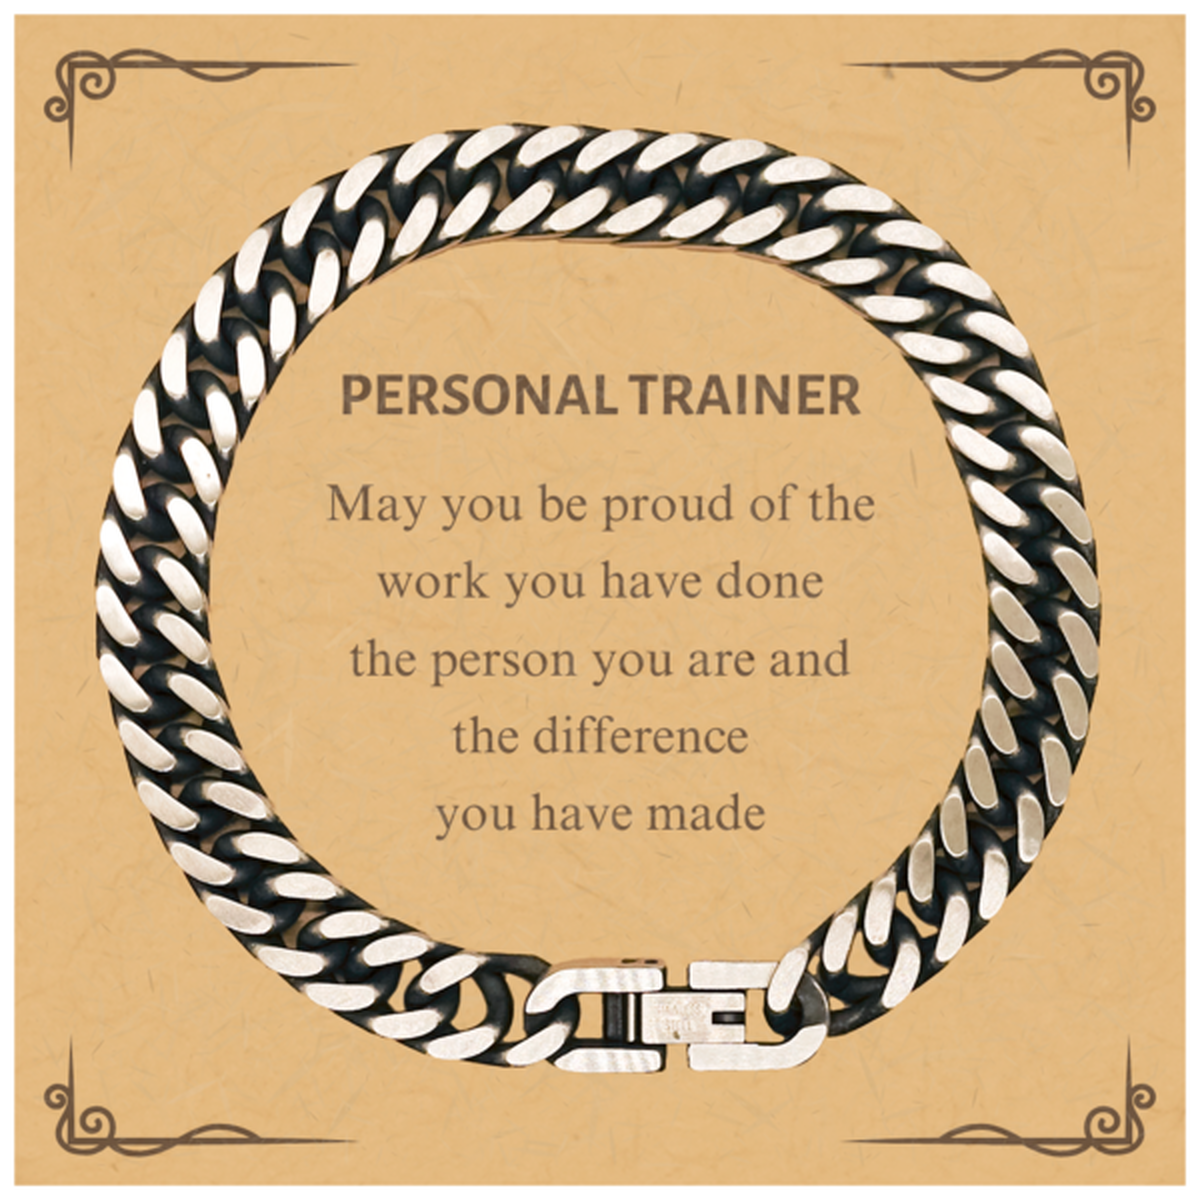 Personal Trainer May you be proud of the work you have done, Retirement Personal Trainer Cuban Link Chain Bracelet for Colleague Appreciation Gifts Amazing for Personal Trainer